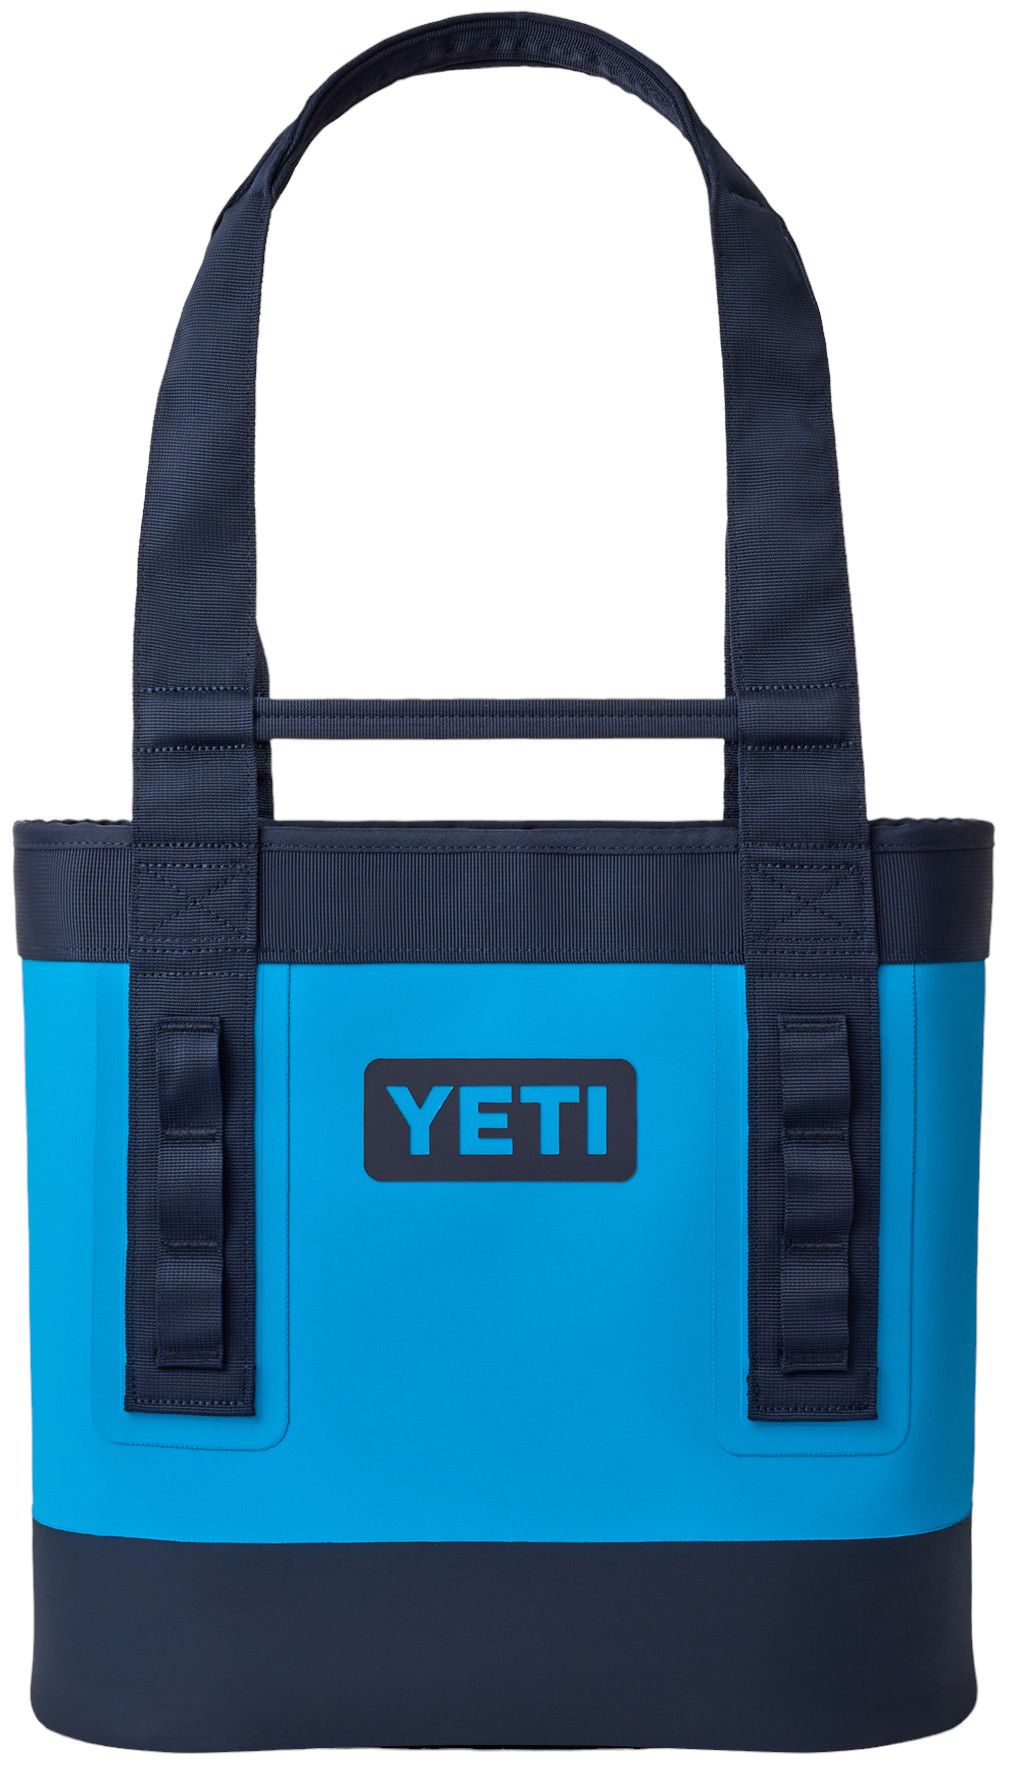 Photos - Suitcase / Backpack Cover Yeti Camino 20 Carryall Tote Bag, Men's, Big Wave Blue 22YETUCMN20CRRYLLRE 